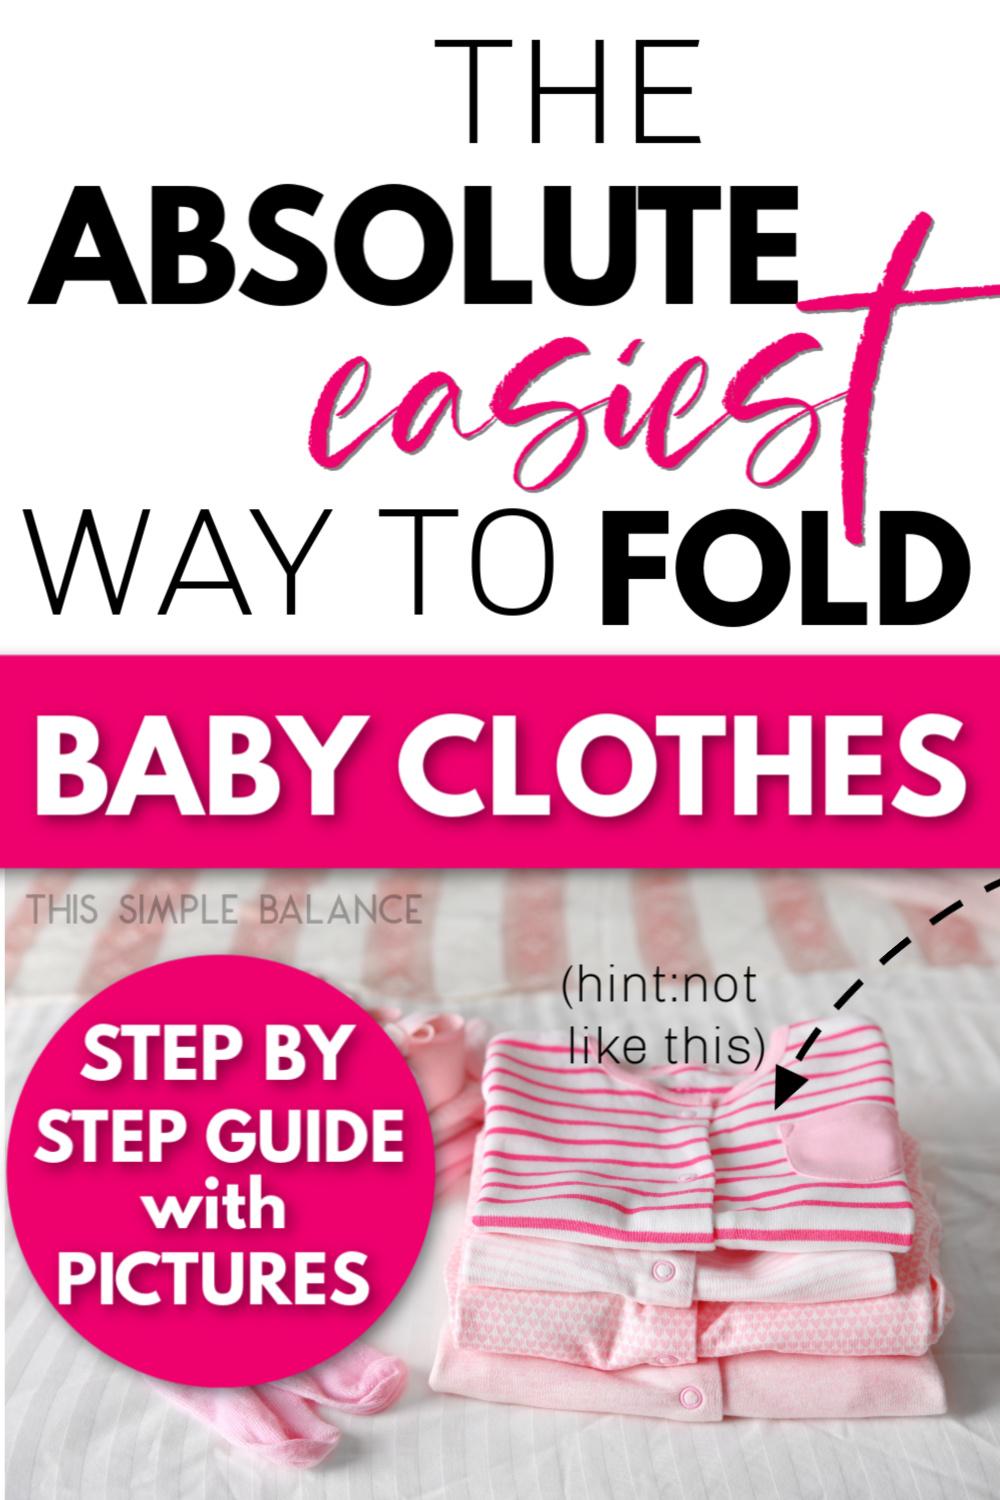 pink baby girl clothes folded on bed, with text overlay, "the absolute easiest way to fold baby clothes - step by step guide with pictures"